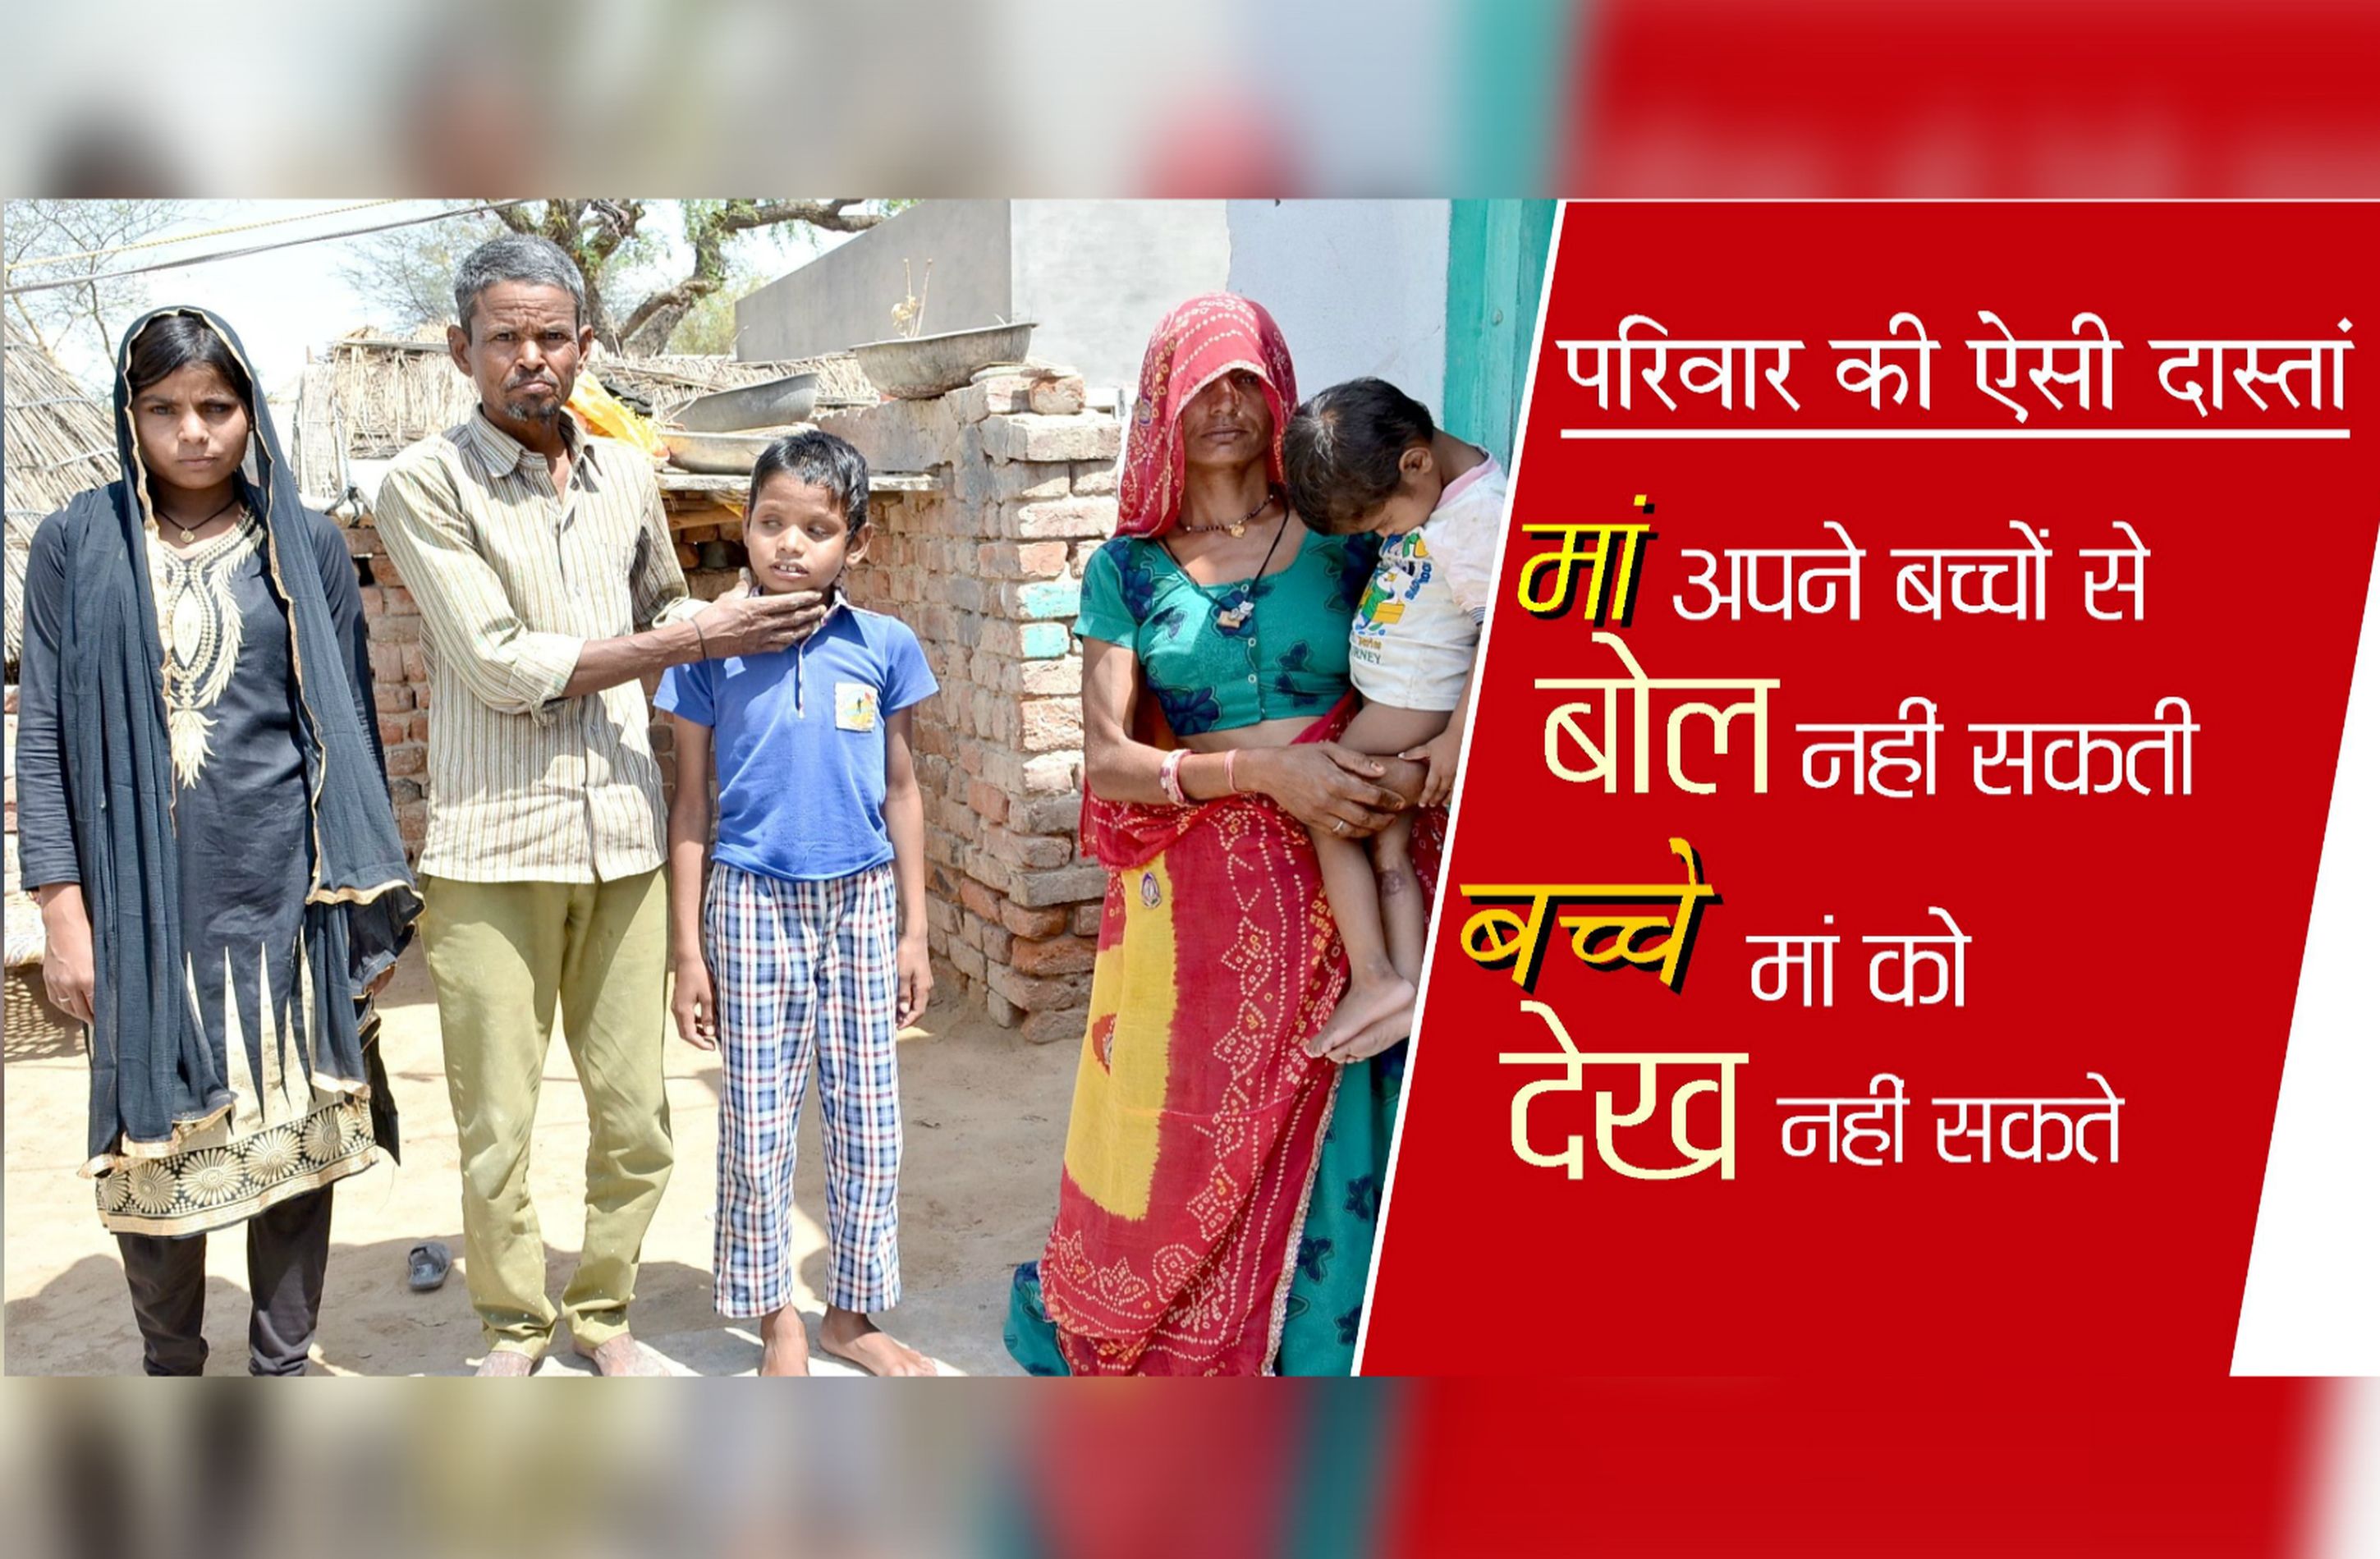 painfull news,Painfull story of family from rolsabsar fatehpur sikar,helpless story of a family in sikar